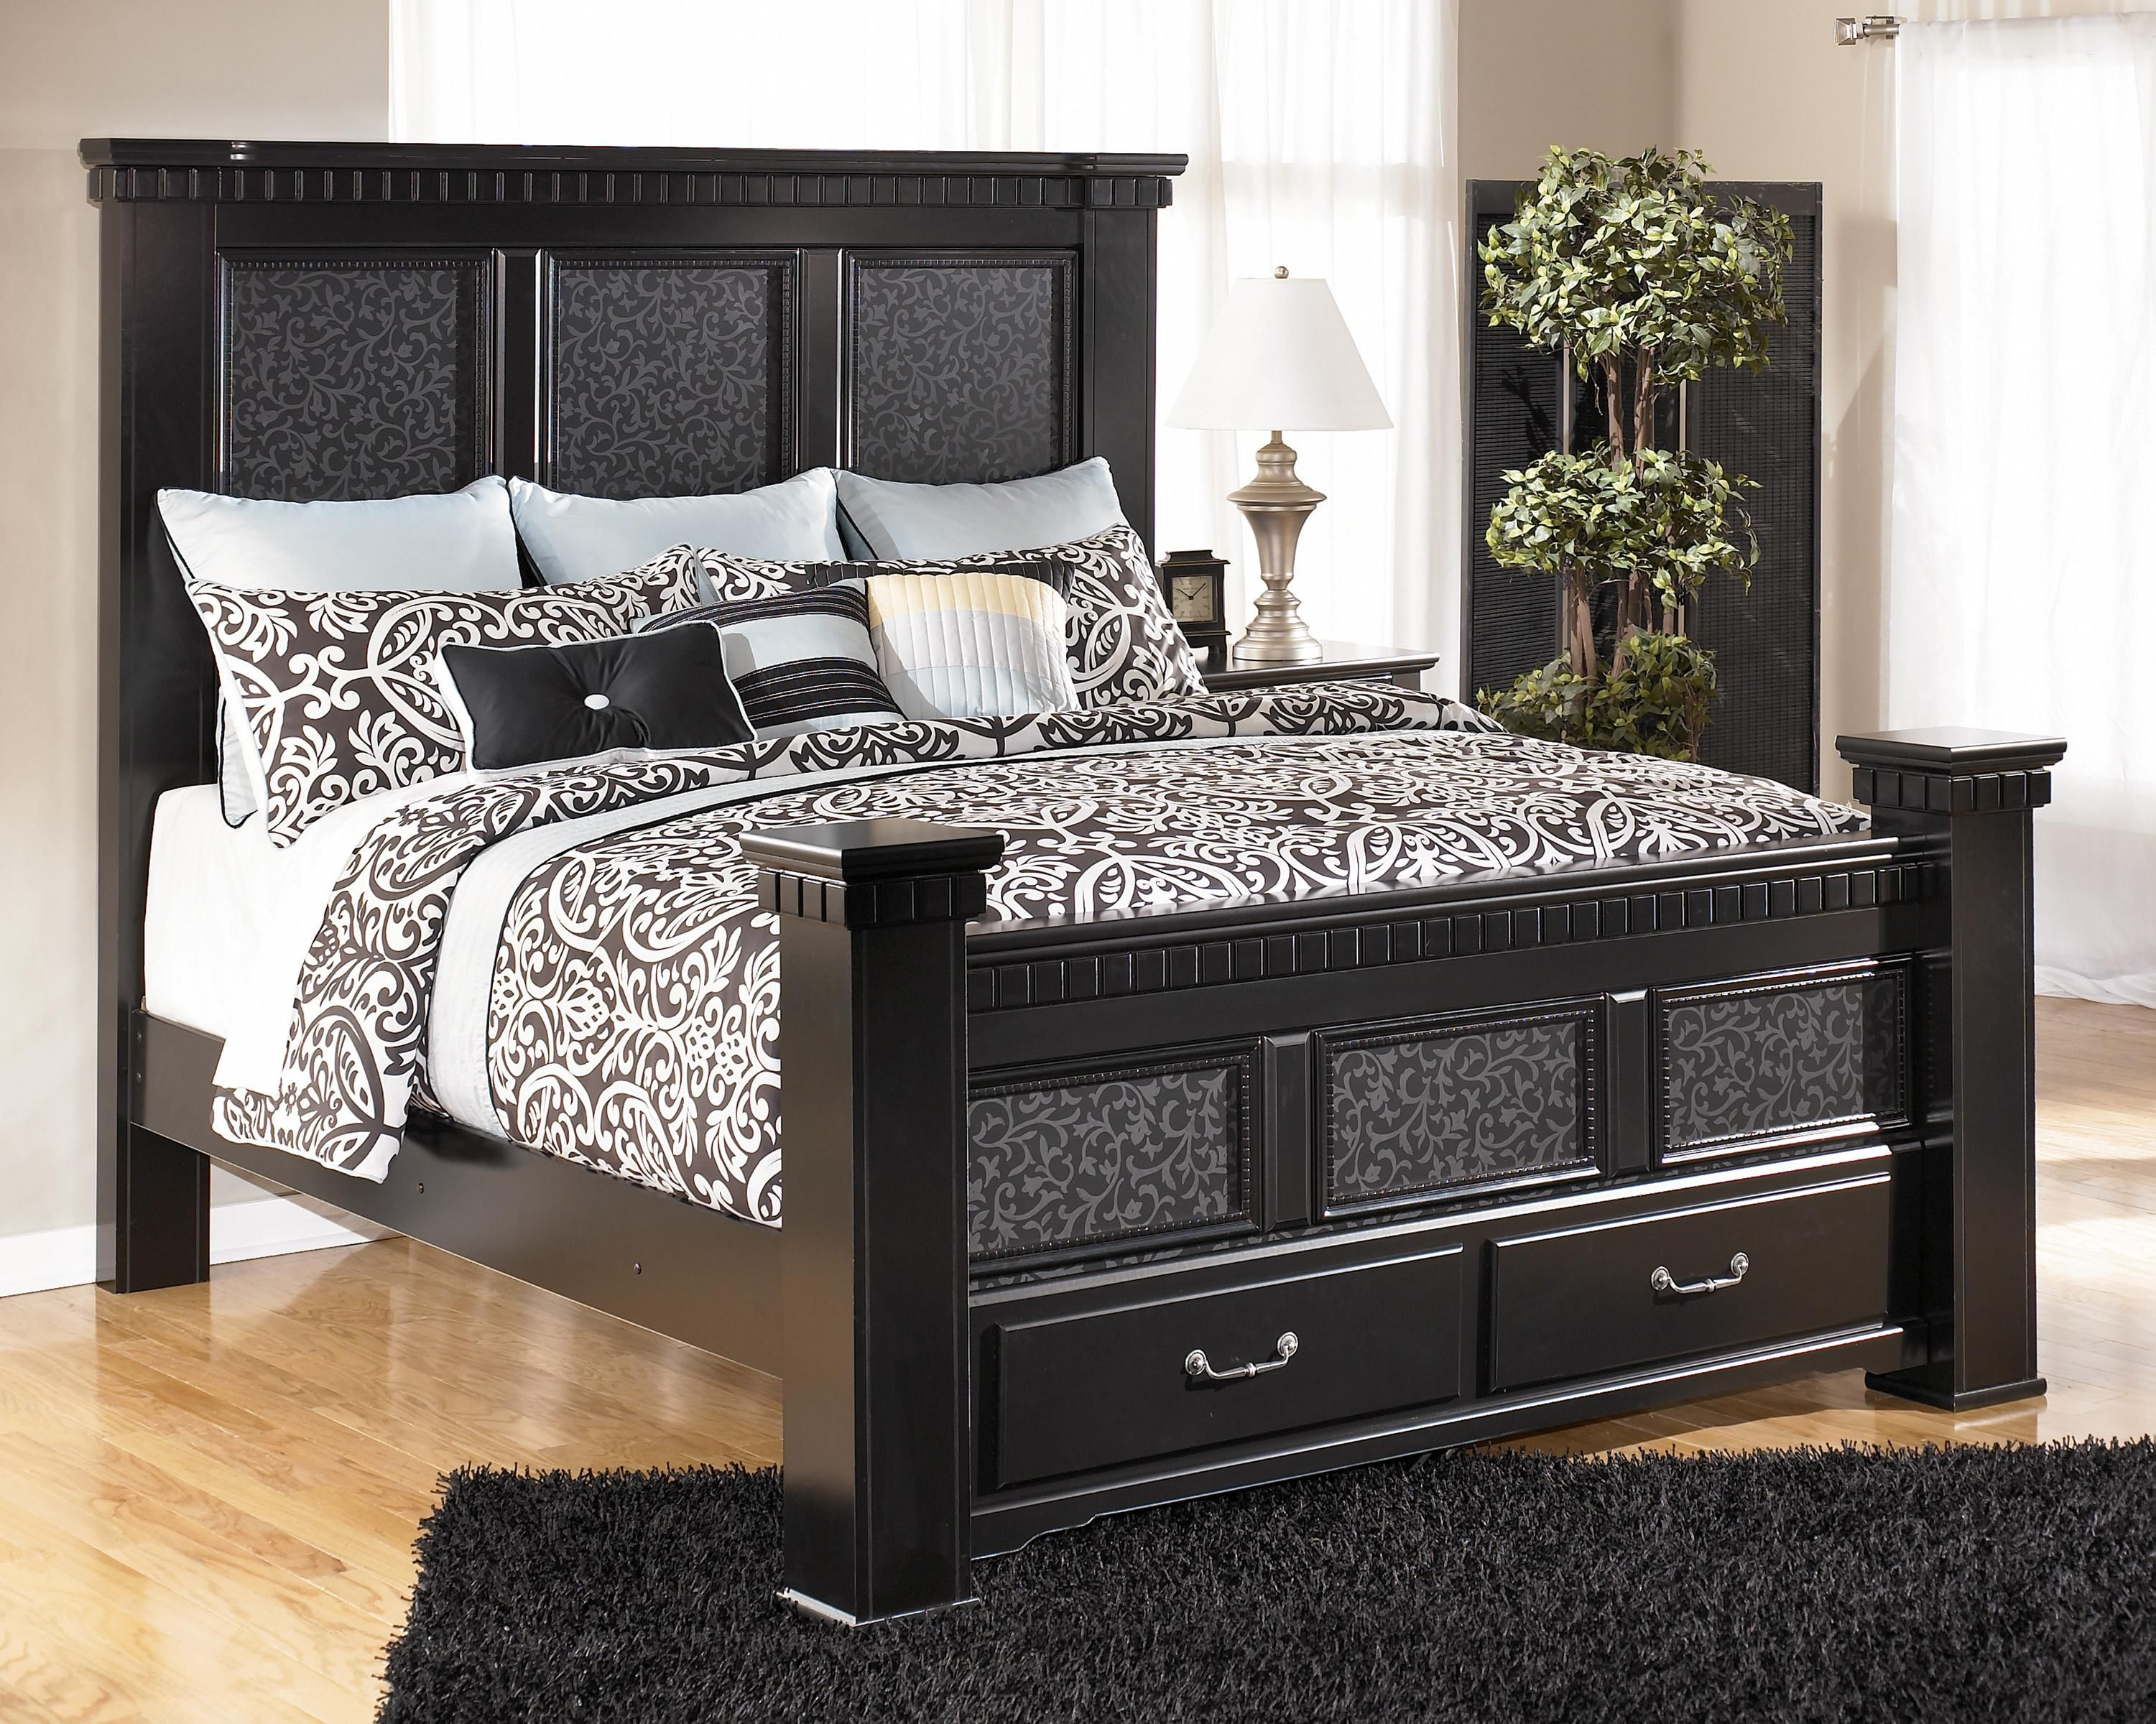 Cavallino King Mansion Bed With Storage Footboard Signature for size 3001 X 2400